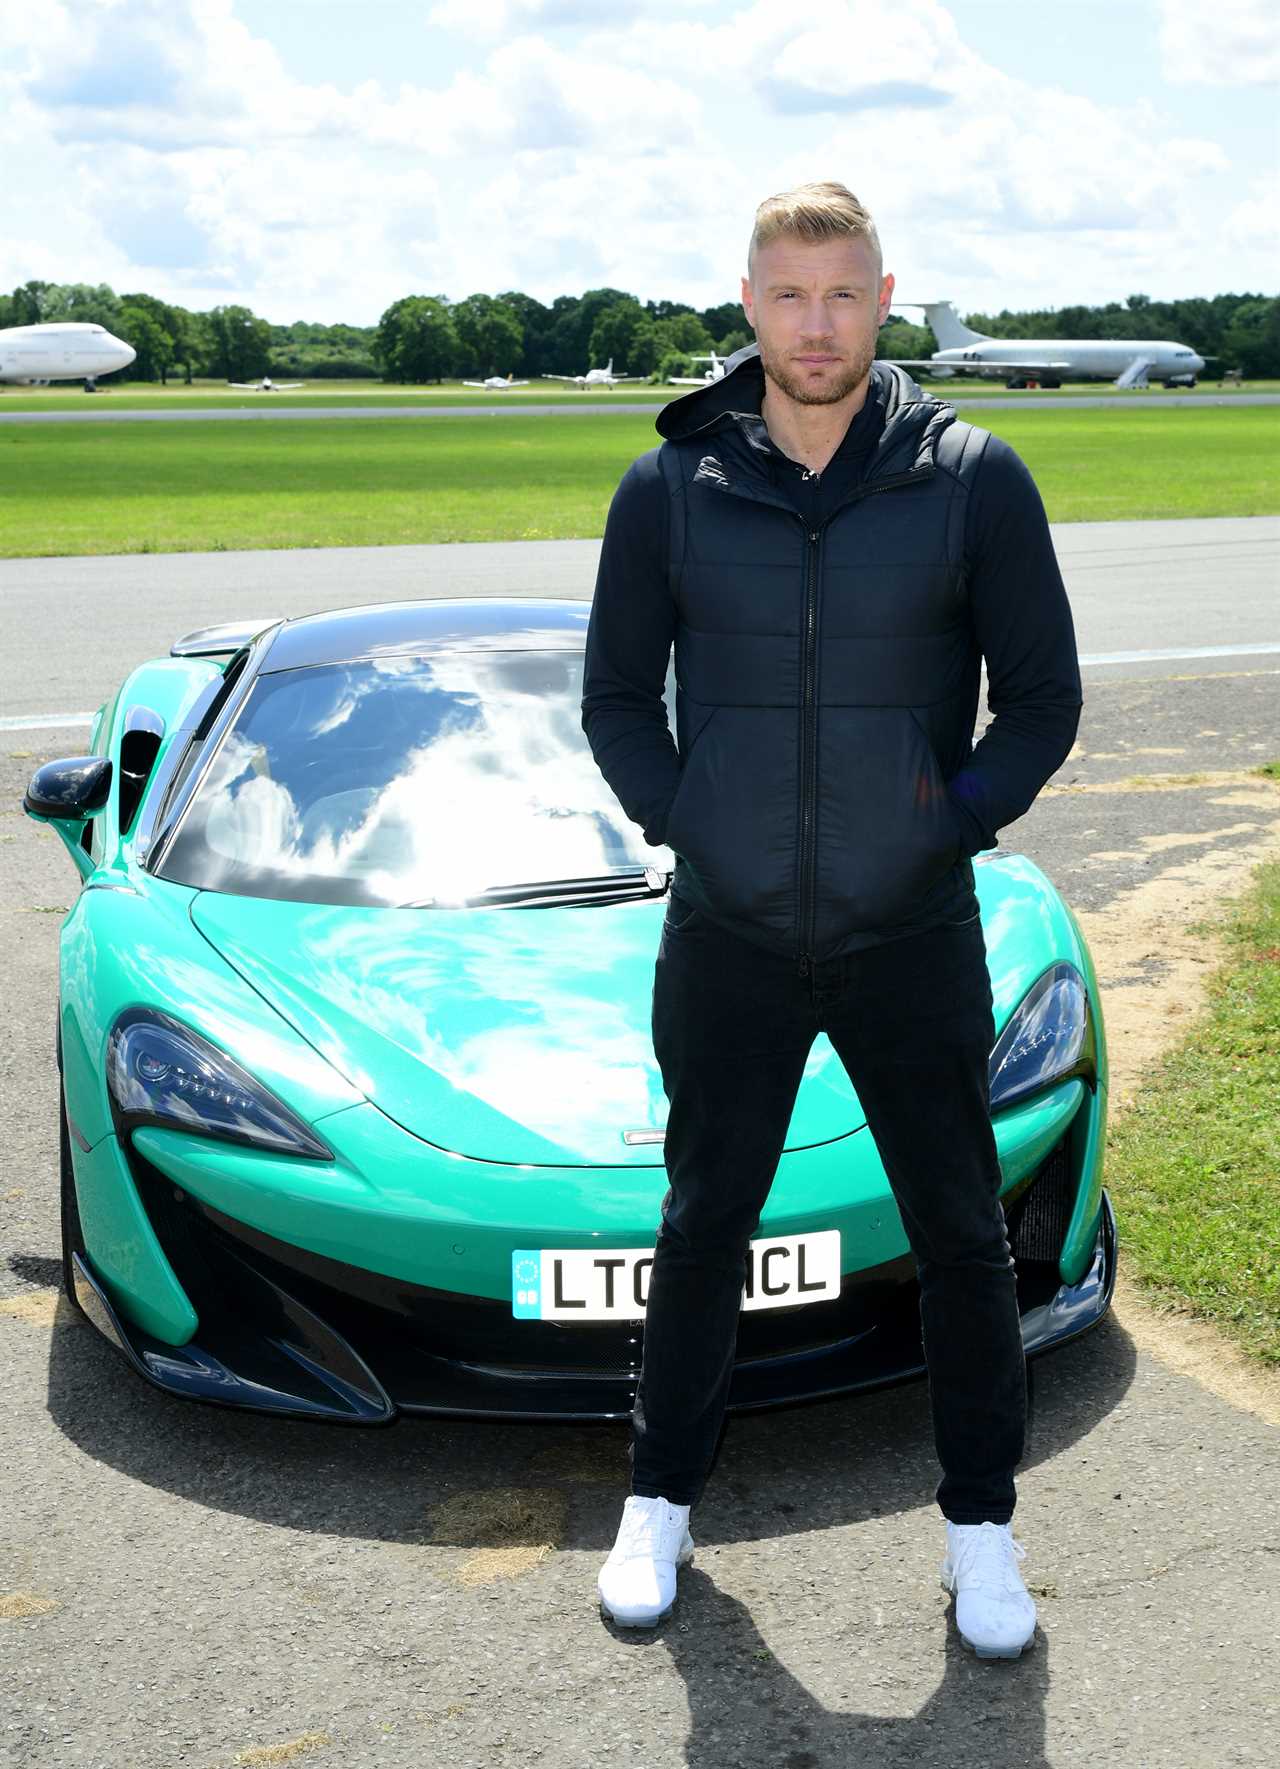 Top Gear’s Freddie Flintoff was left with horror face injuries for 45 MINUTES in near-fatal crash, shock dossier reveals